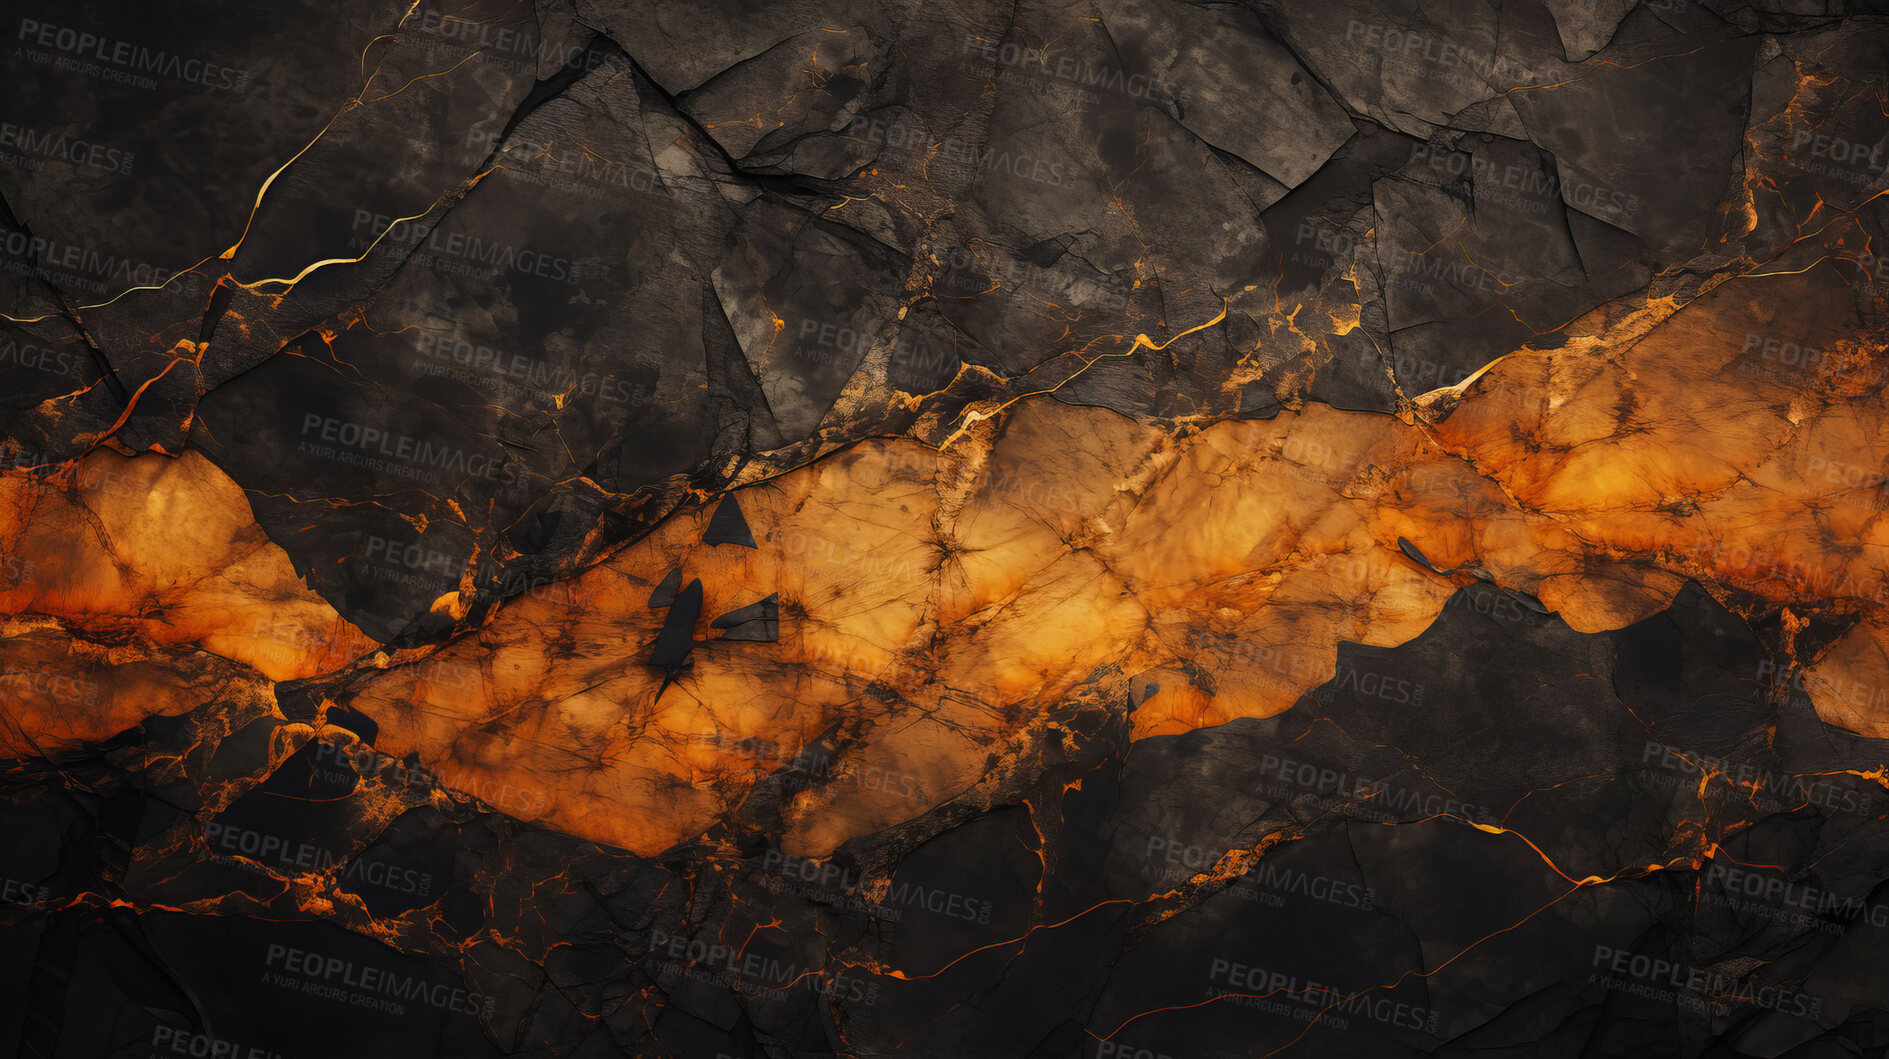 Buy stock photo Rocky textures, cracks, and glowing orange light. Abstract geological wonders, dynamic surfaces, and ethereal illumination converge in a visually stunning depiction of abstract art.